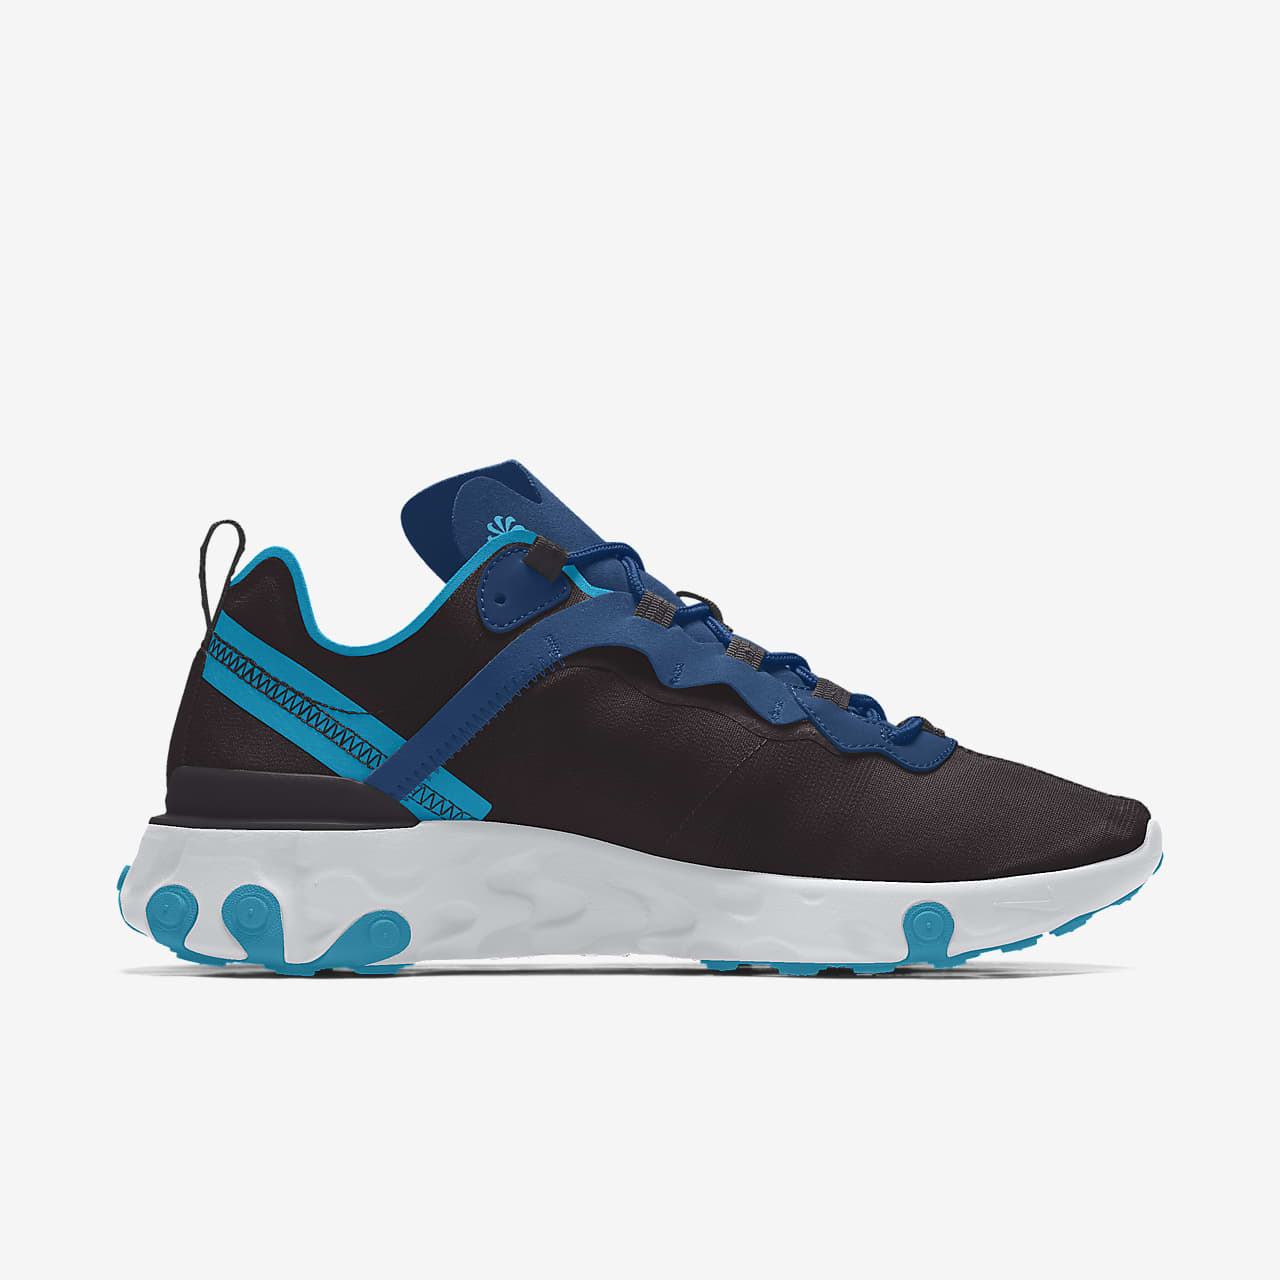 nike react element by you